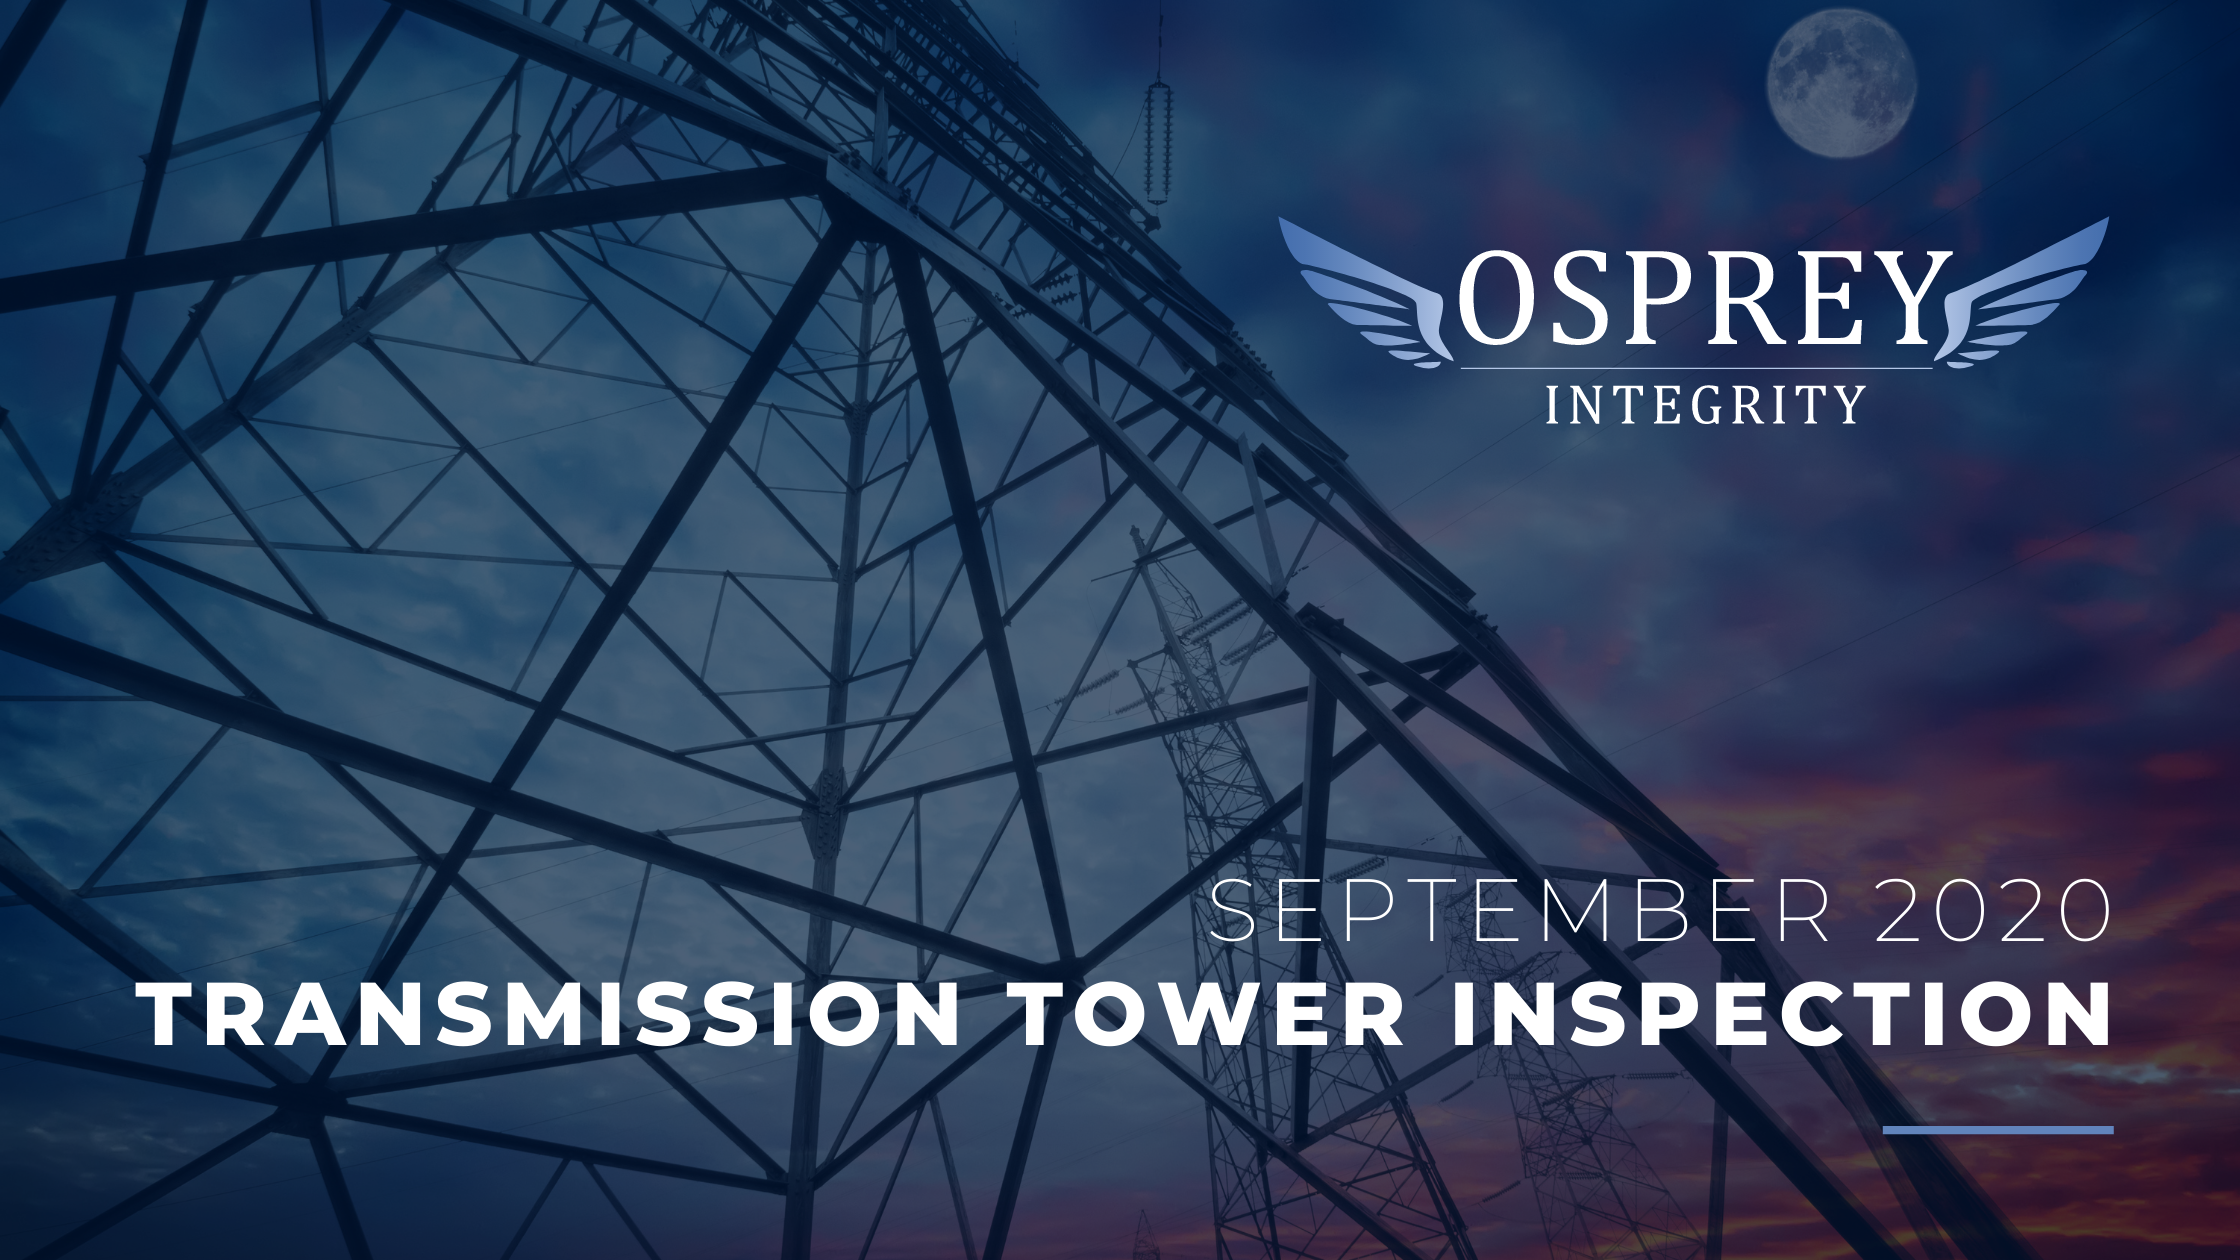 Transmission Tower Inspection